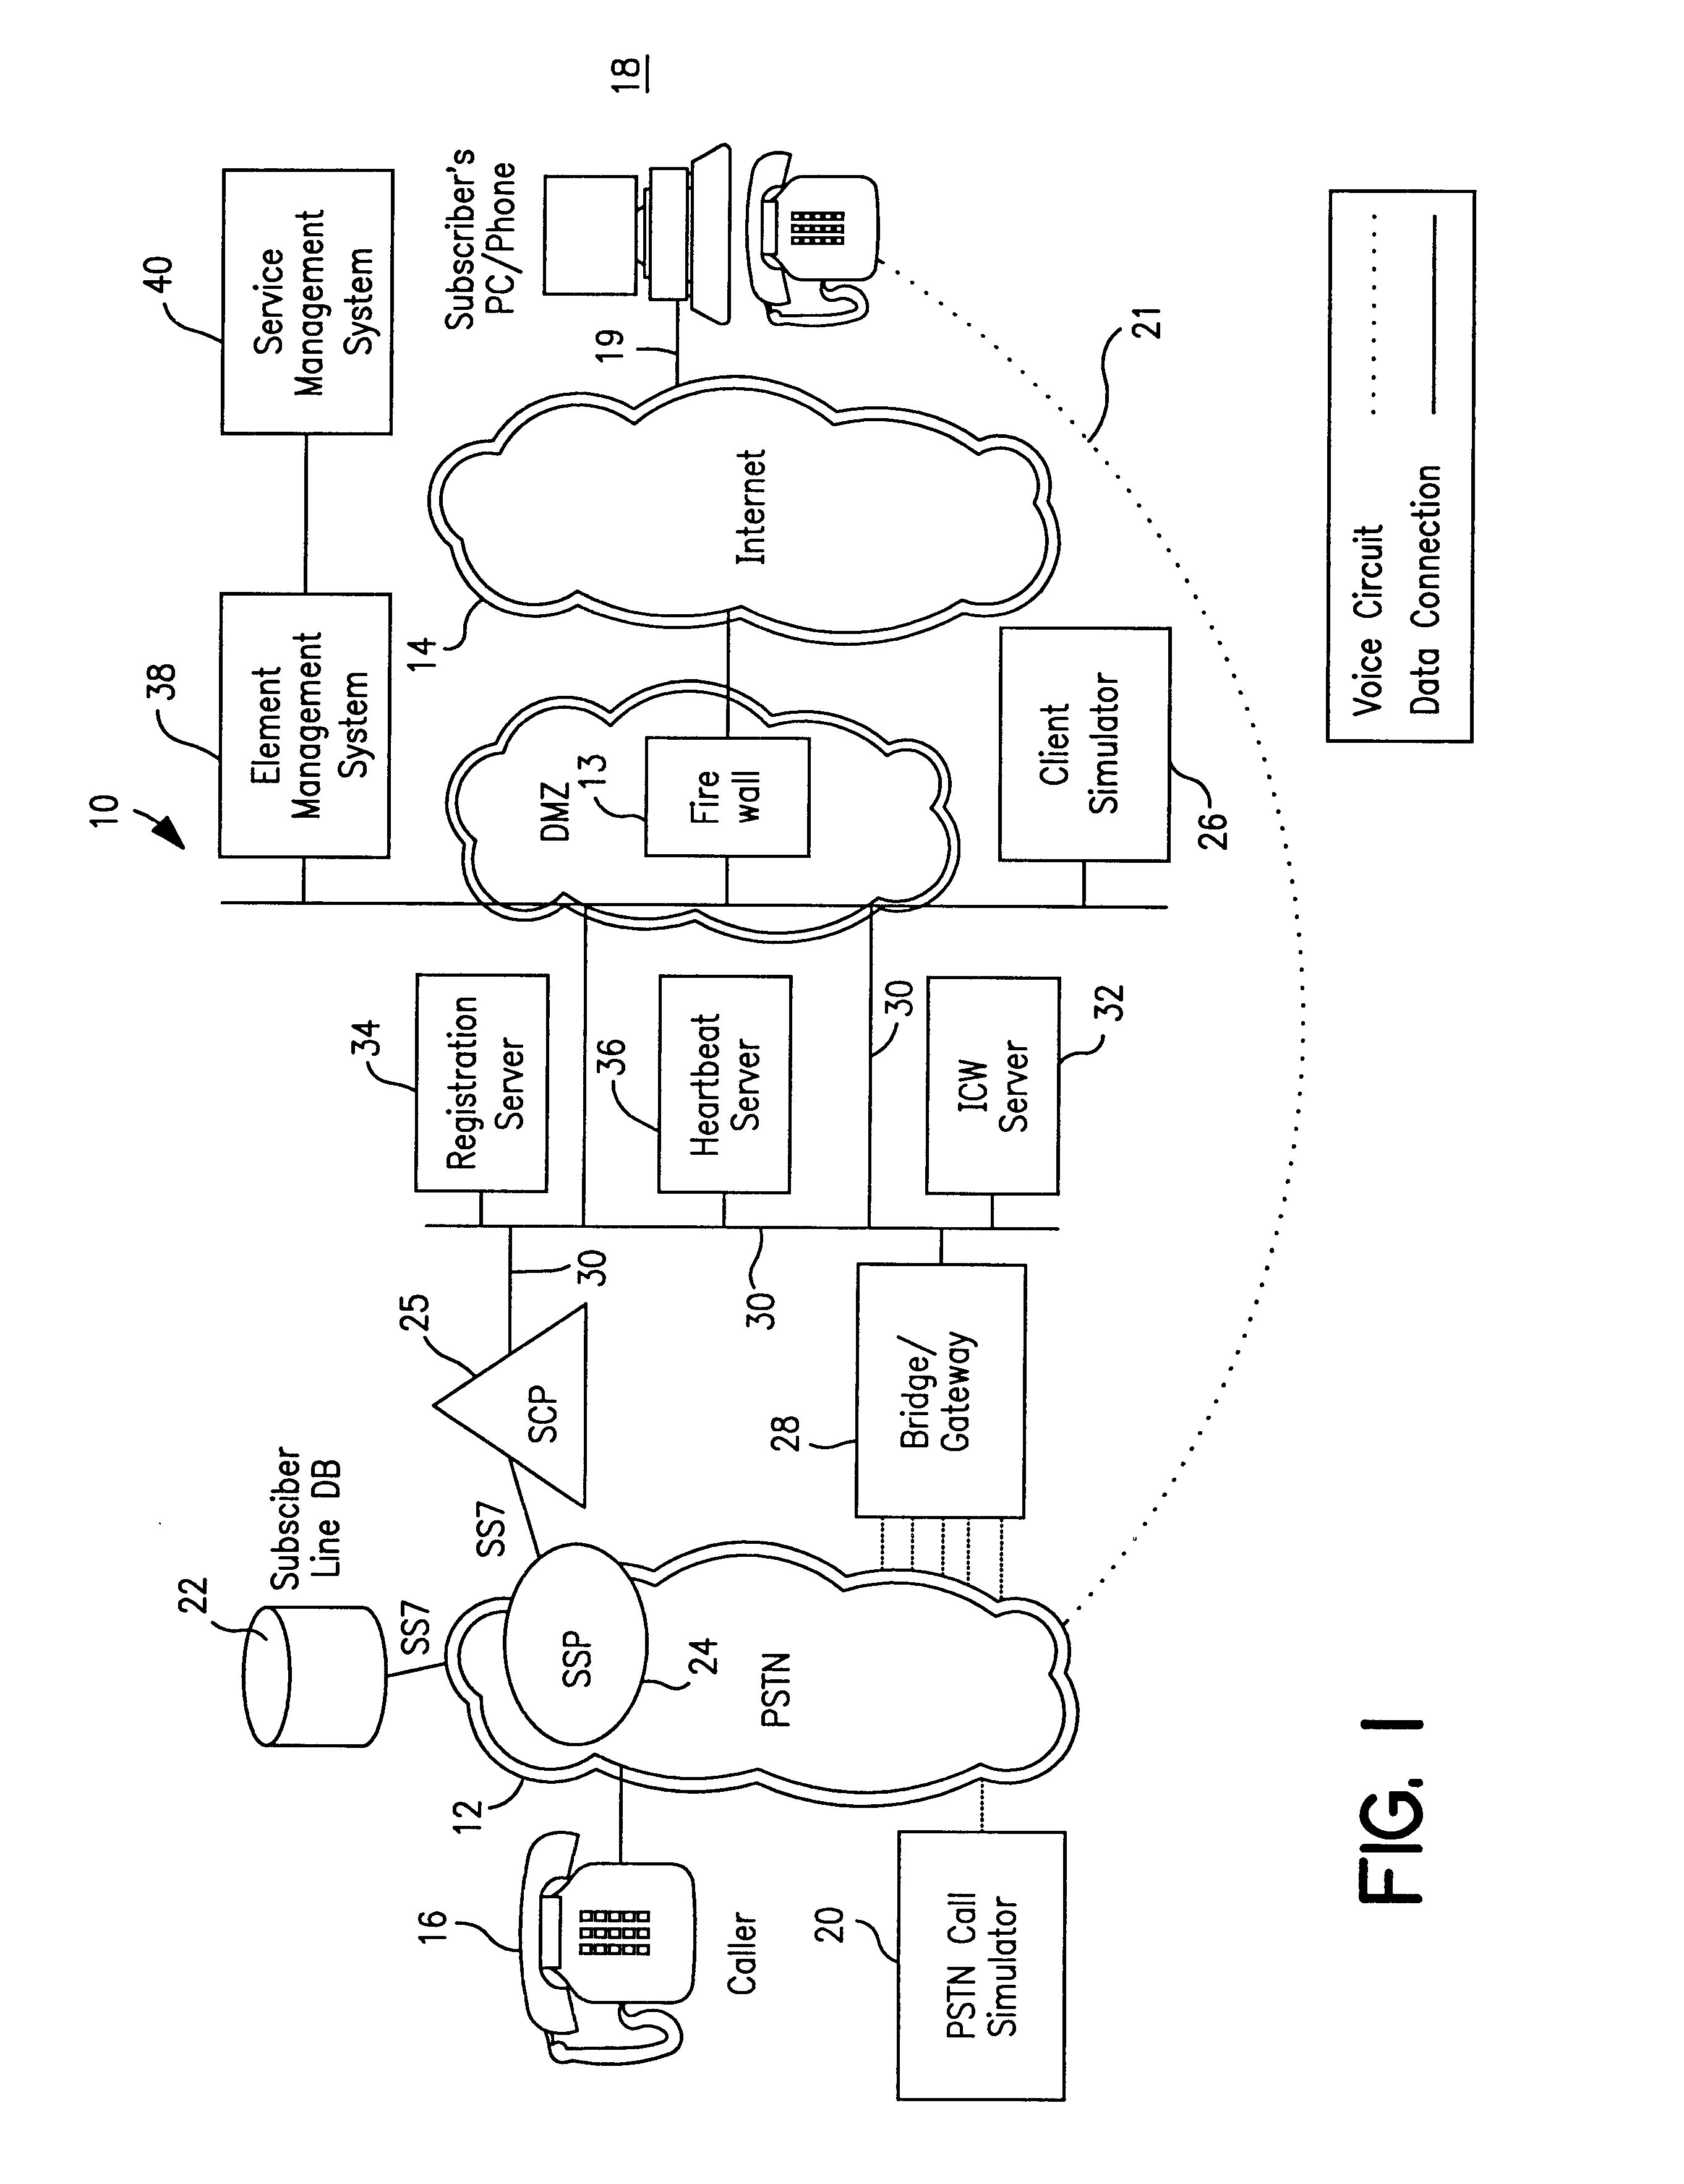 Client simulator and method of operation for testing PSTN-to-IP network telephone services for individual & group internet clients prior to availability of the services